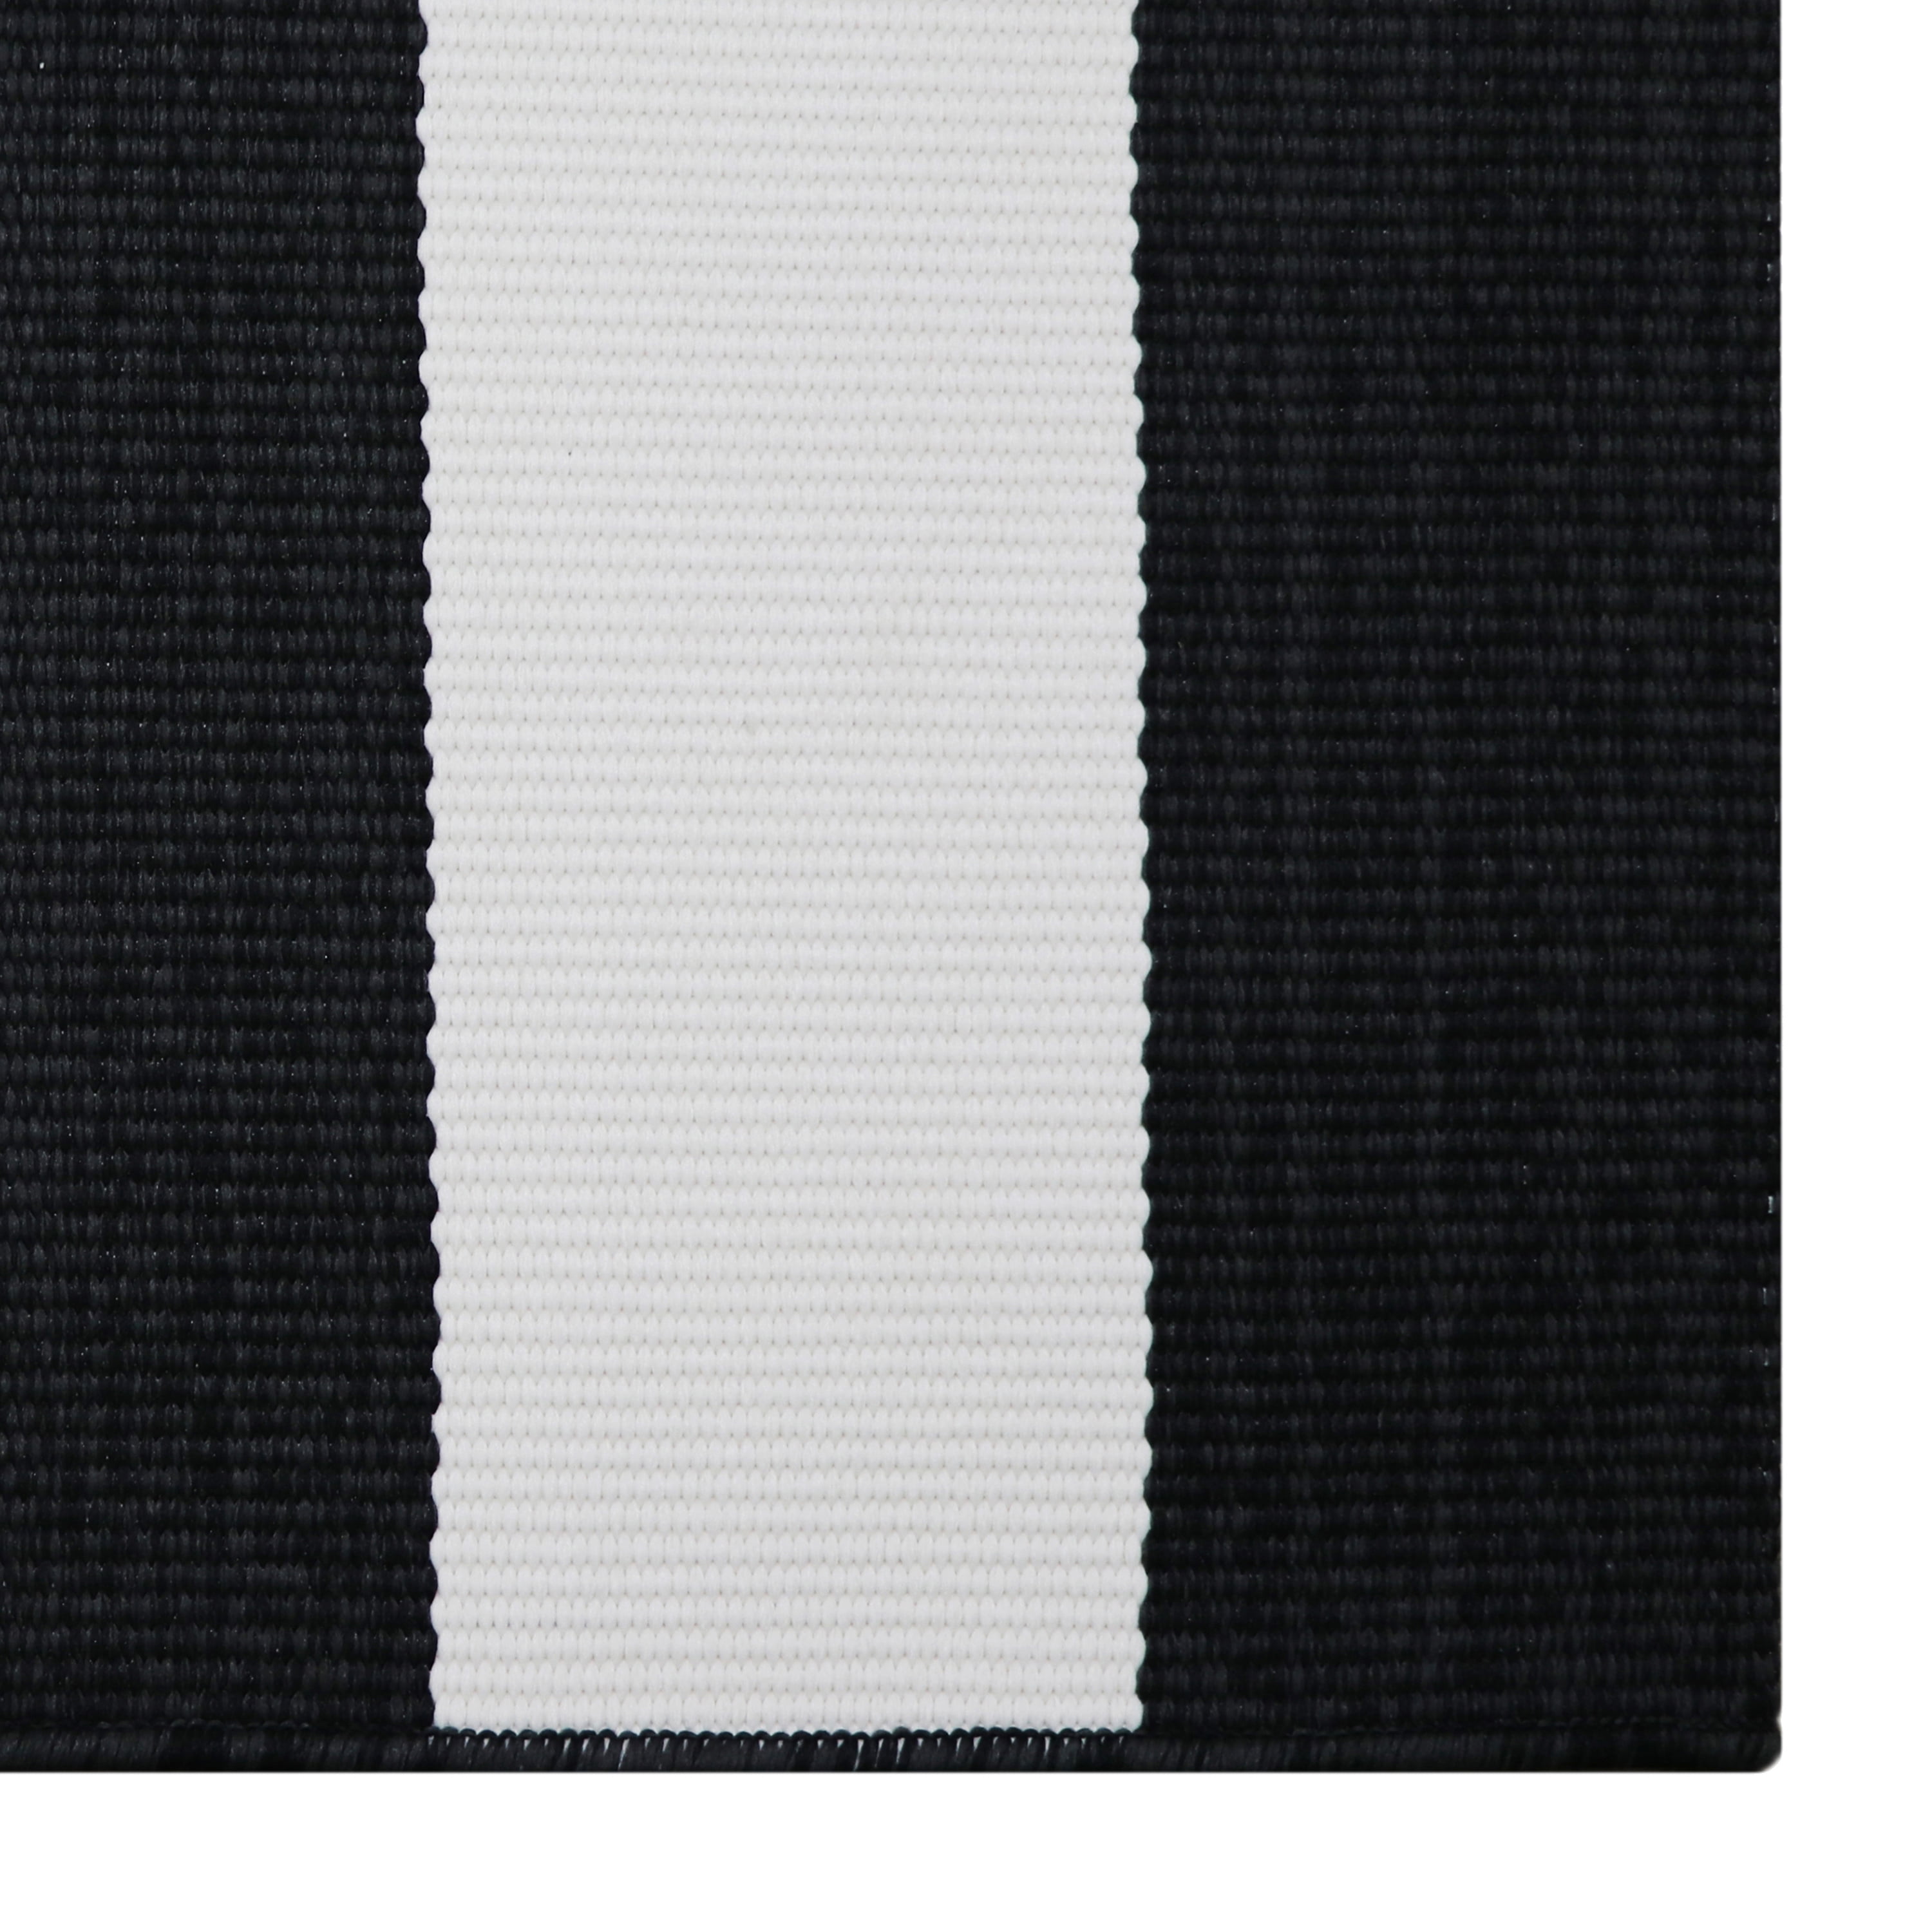 White Striped Outdoor Rug, Indoor Outdoor Black And White Striped Rug 5×7